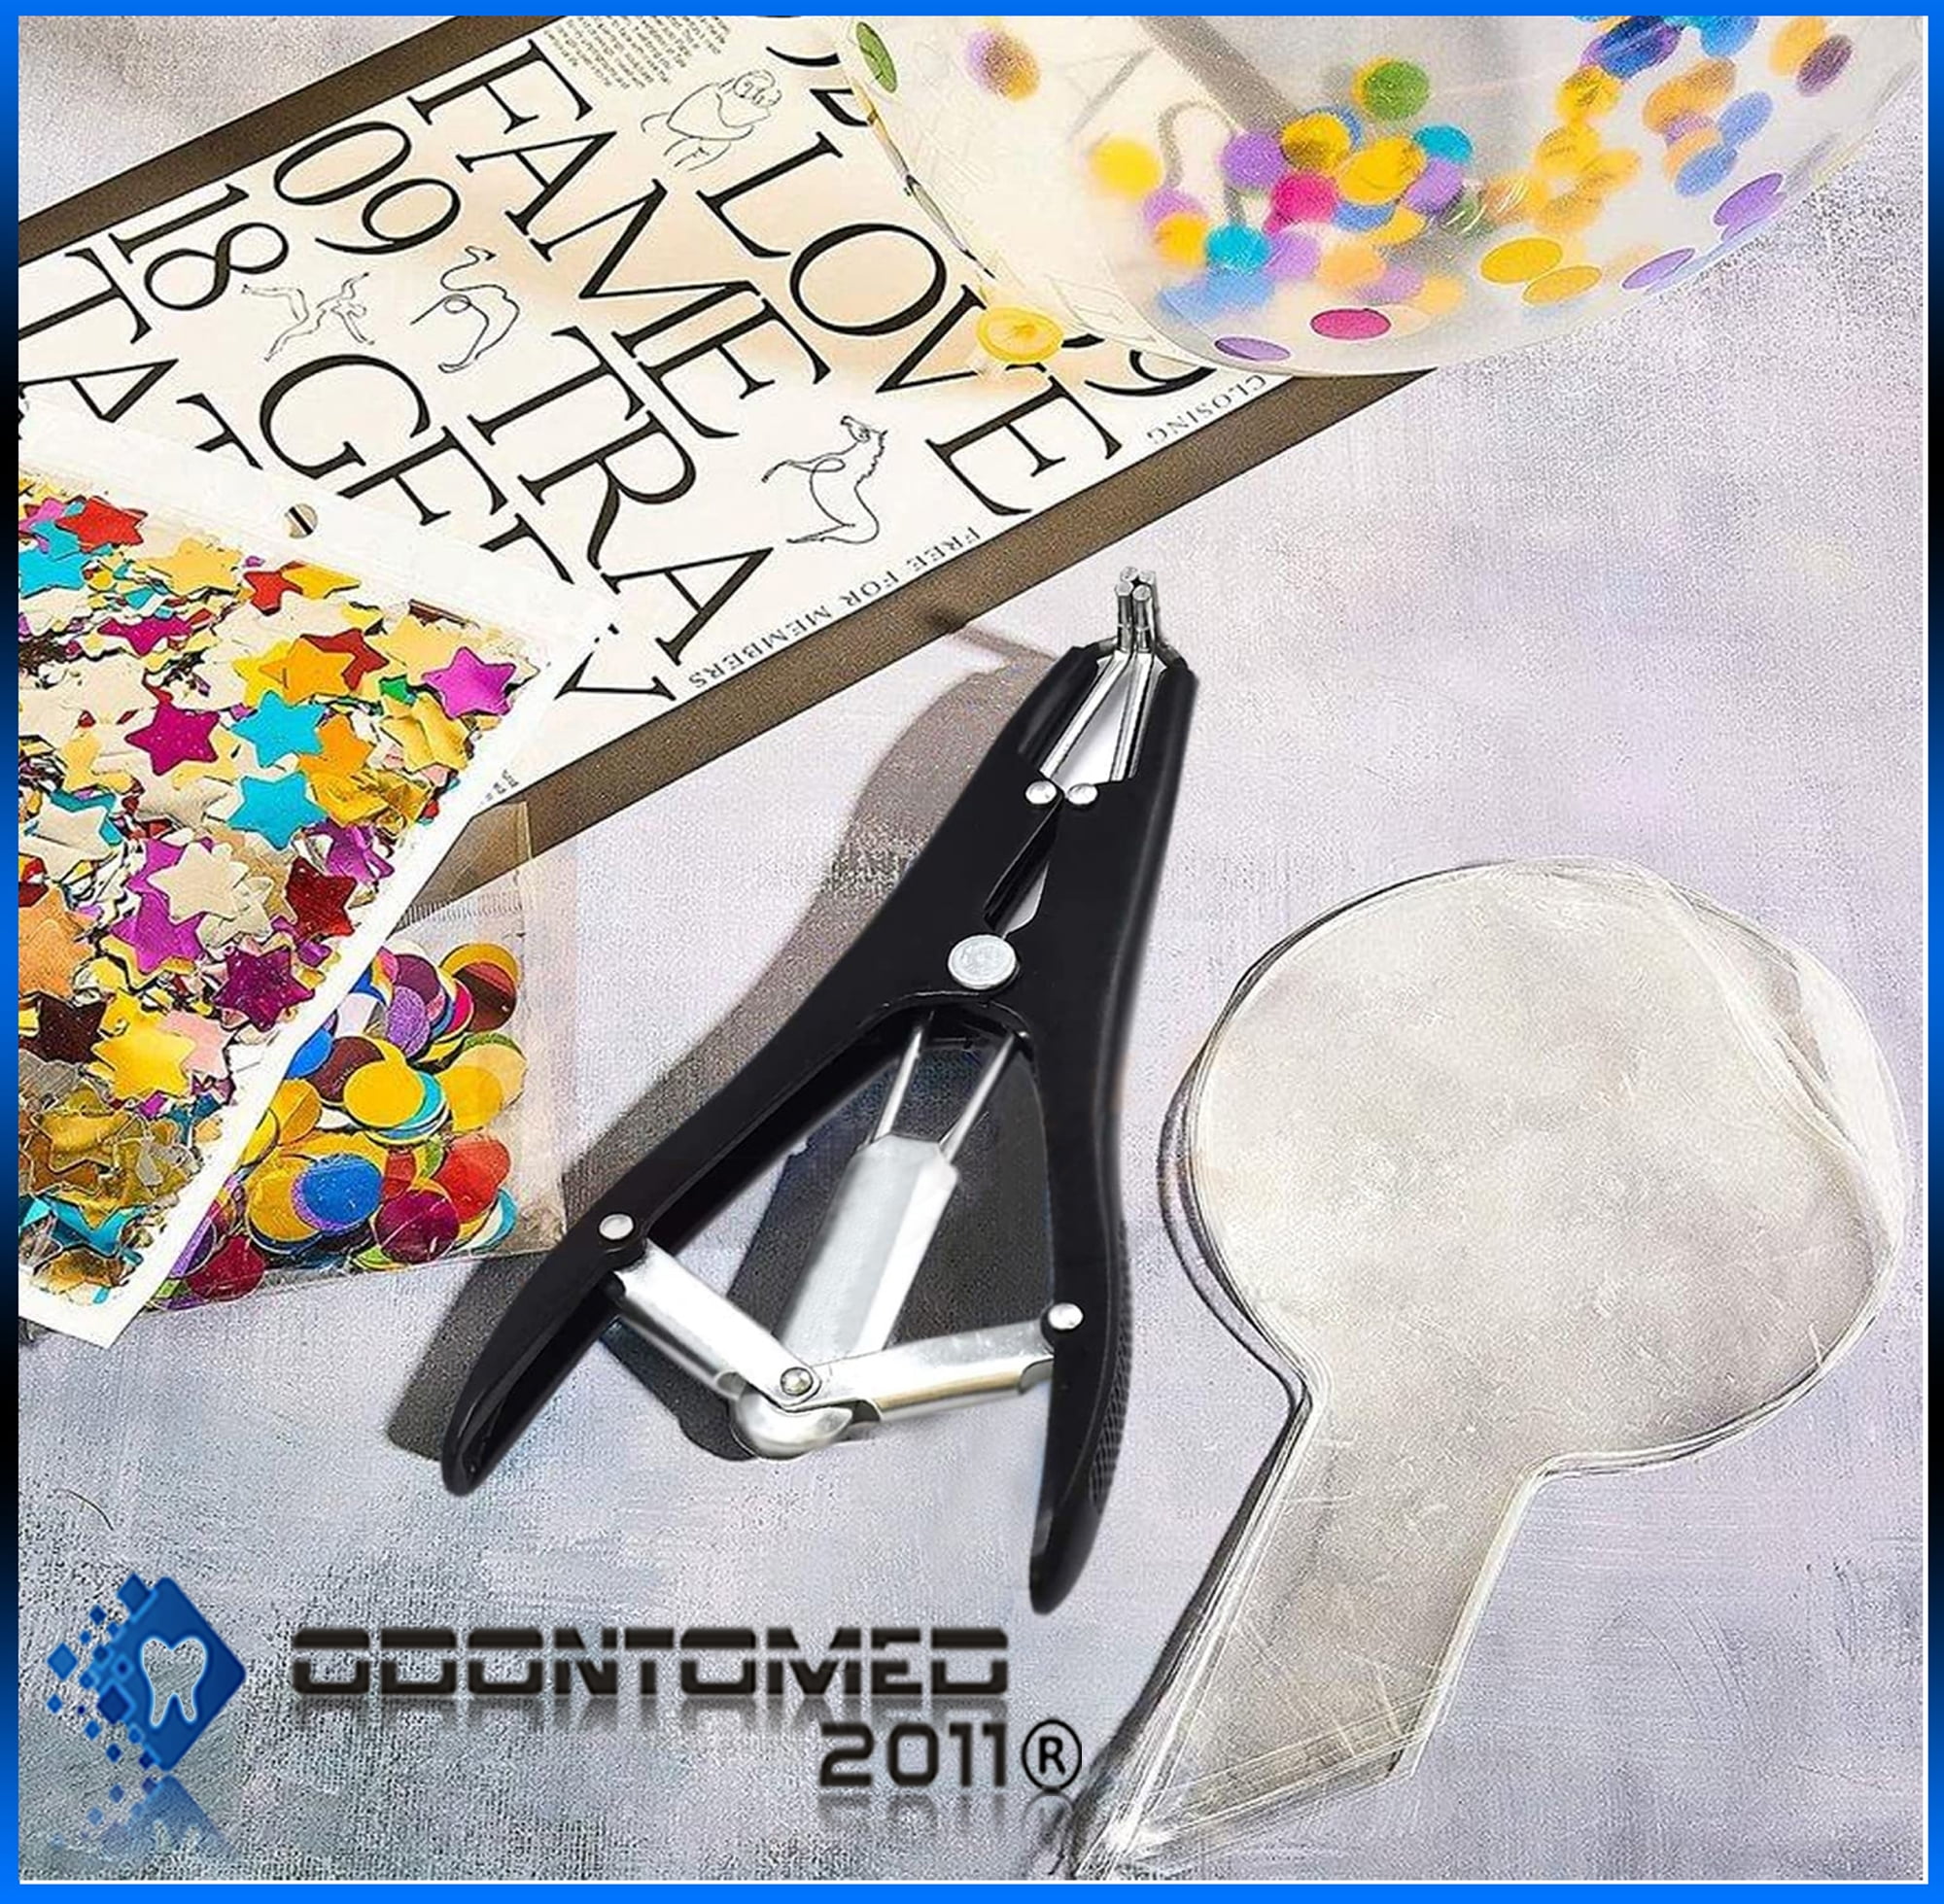 Odontomed2011 Balloon Expansion Open Expander Pliers DIY Tools Party  Supplies Filling Confetti DIY Sequin Pedals Stuffing 